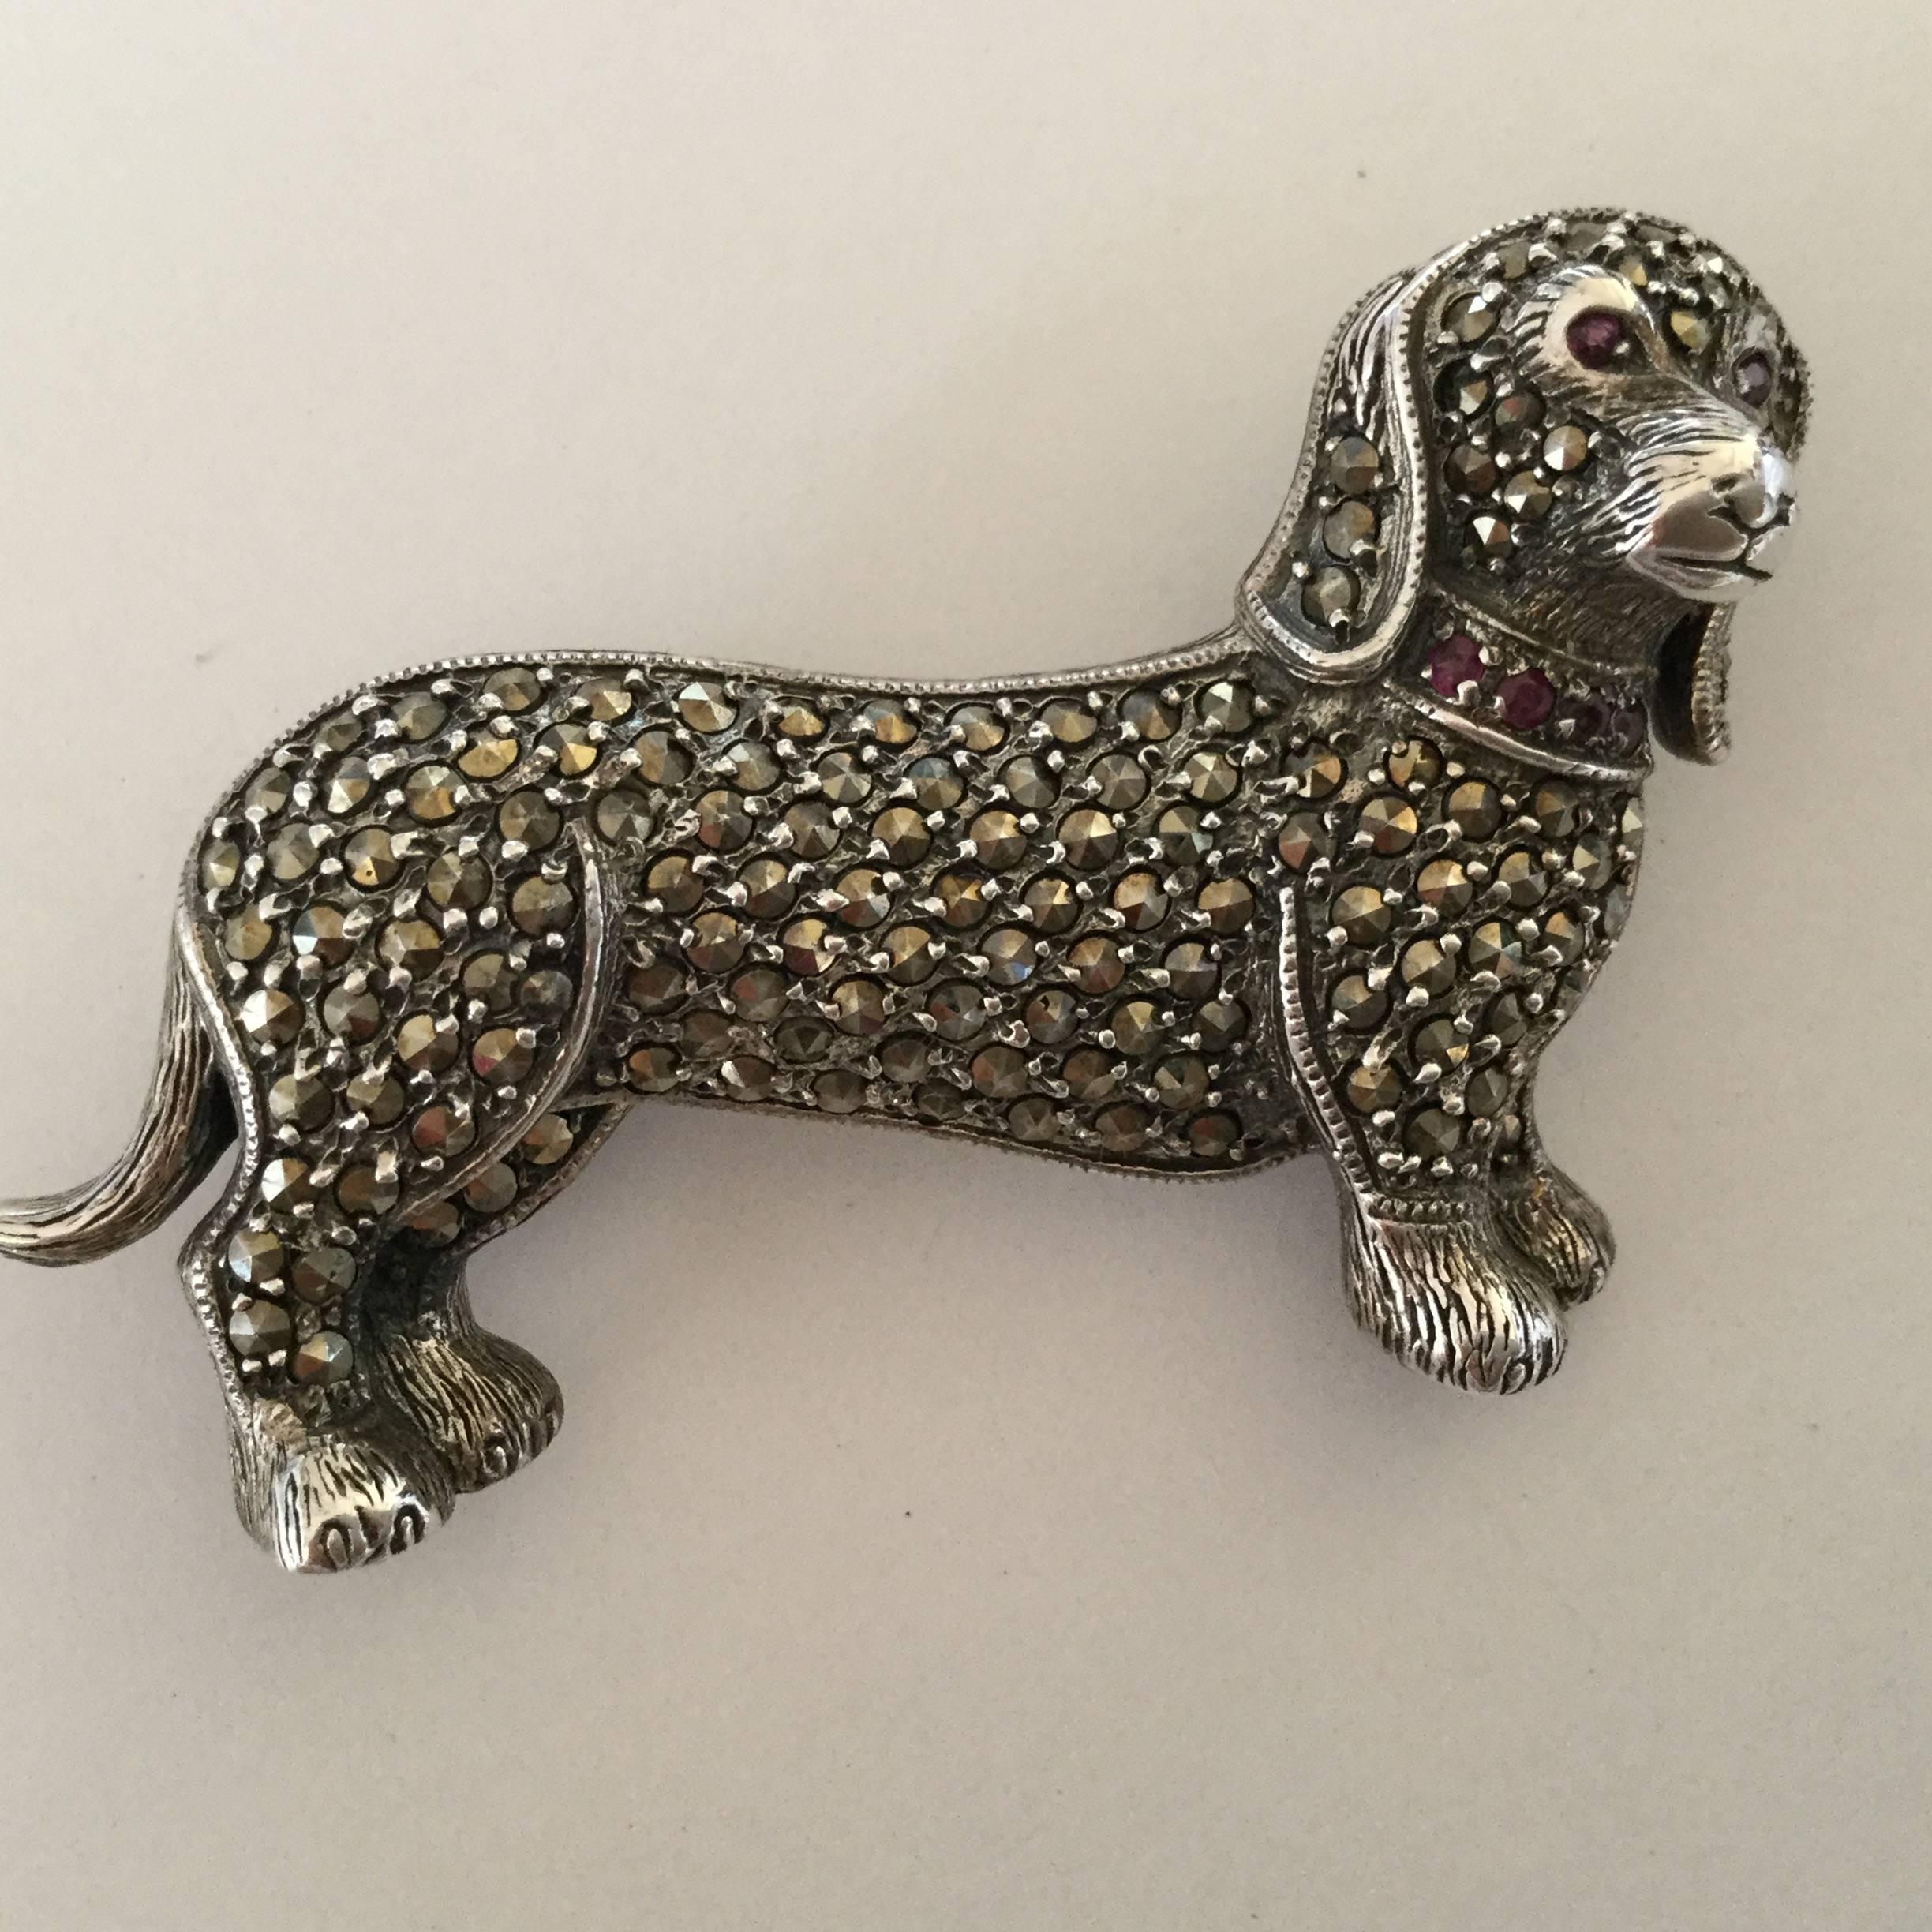 Edwardian revival 1980's marcasite and sterling silver dashshund brooch.
Wonderfully detailed design. Expressive, contemplative little face decorated with garnet eyes and a garnet collar. Note the floppy ears and fuzzy paws. Just adorable!  Really